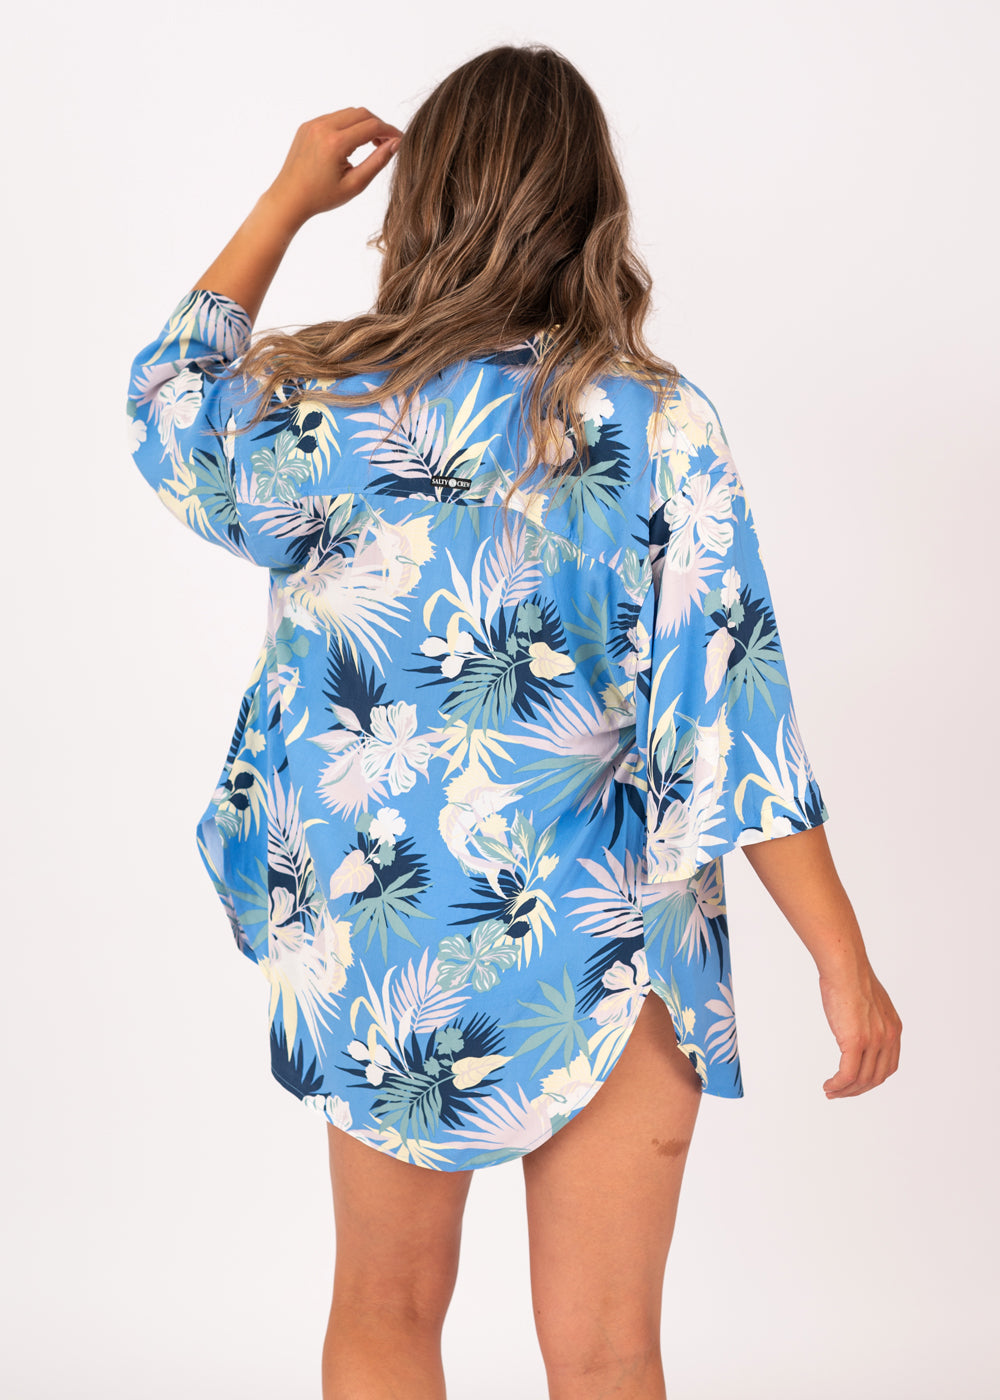 Desert Island Cover Up Shirt by Salty Crew